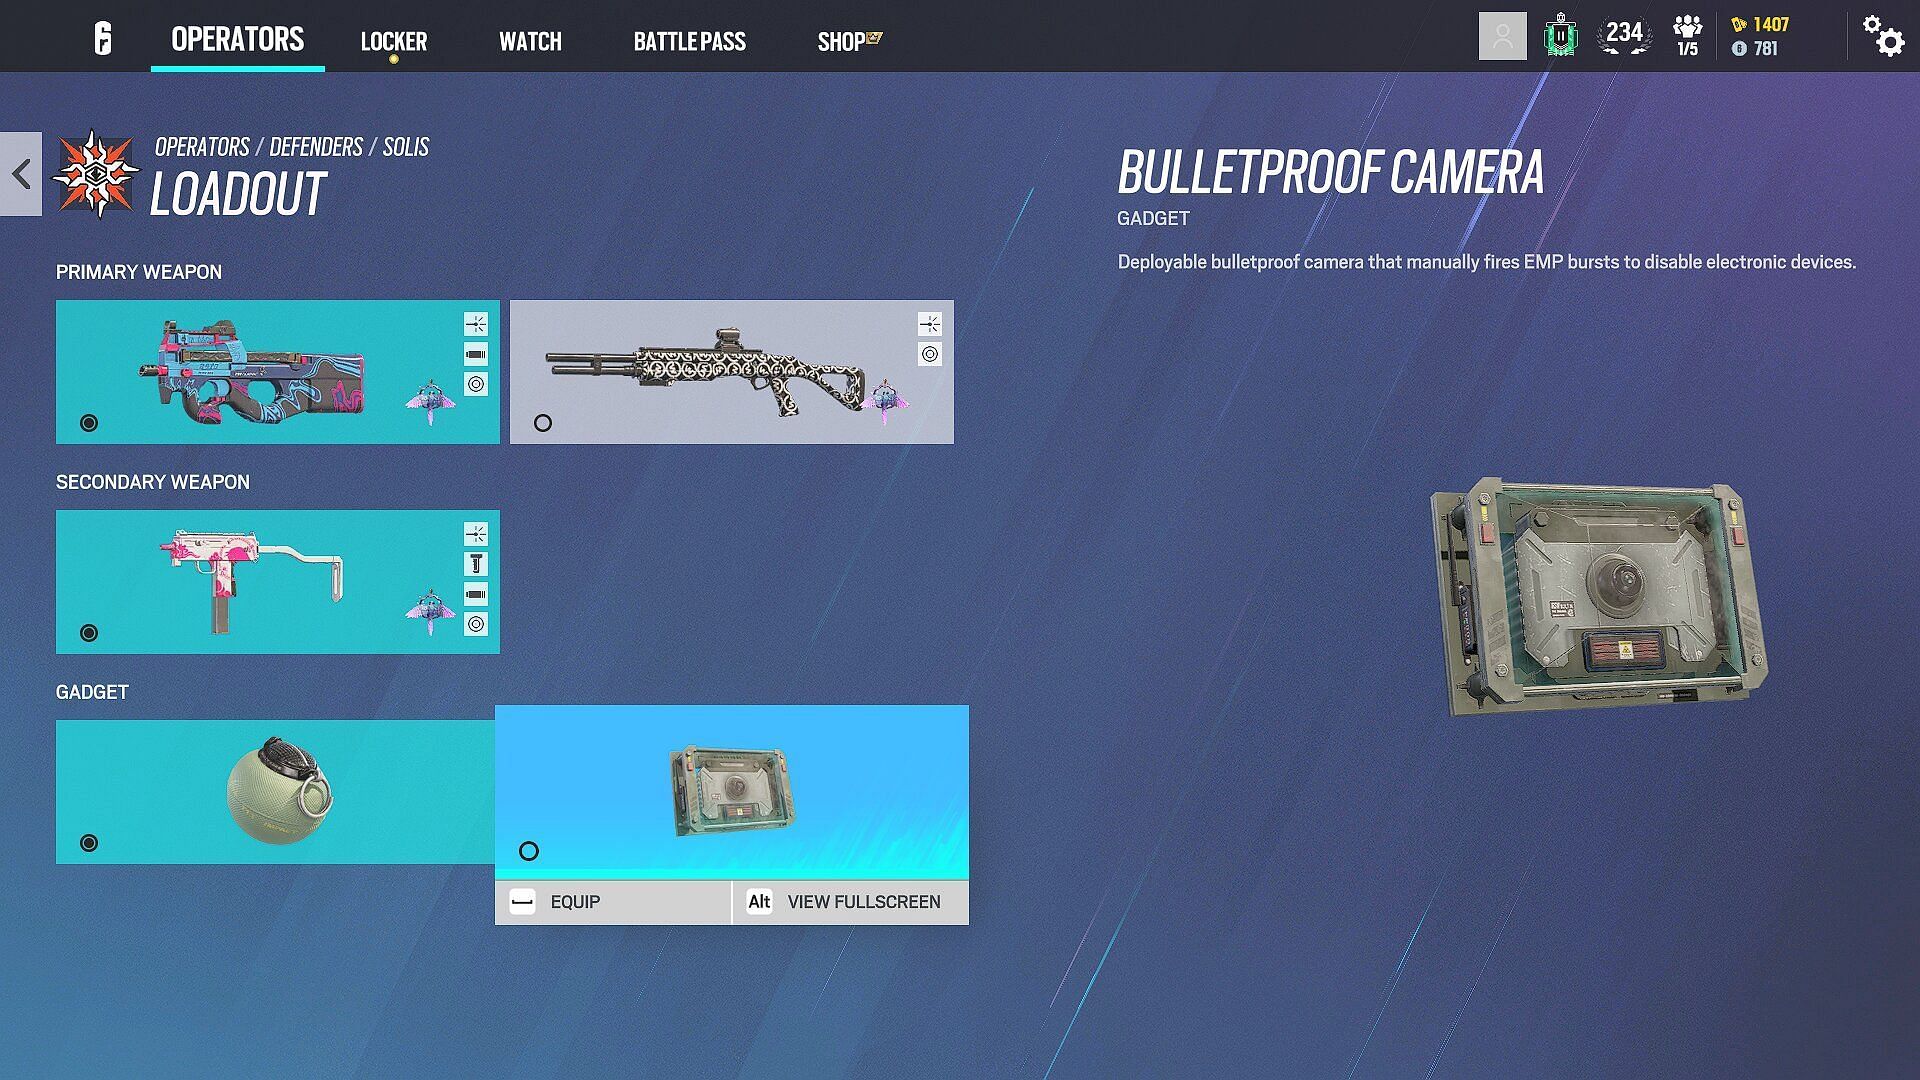 Impact Grenade and Bulletproof cam are the two options for Solis Loadout (Image via Ubisoft)